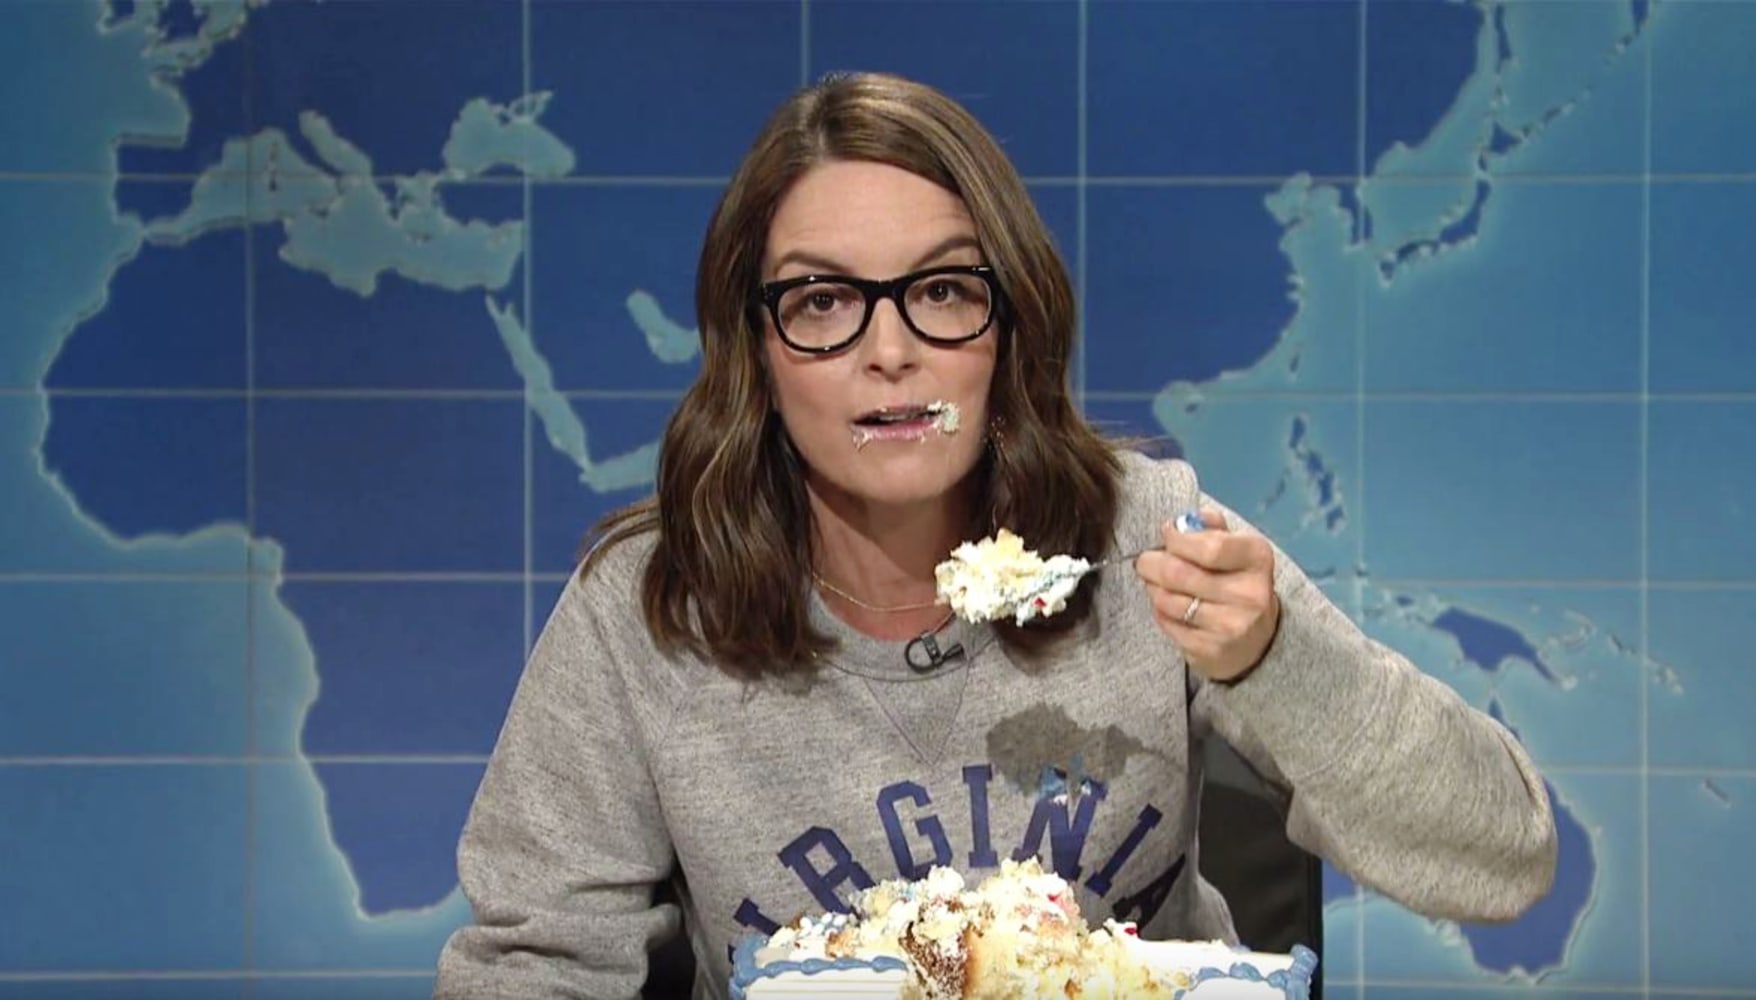 Tina Fey dips a grilled cheese into a cake for the #Resistance